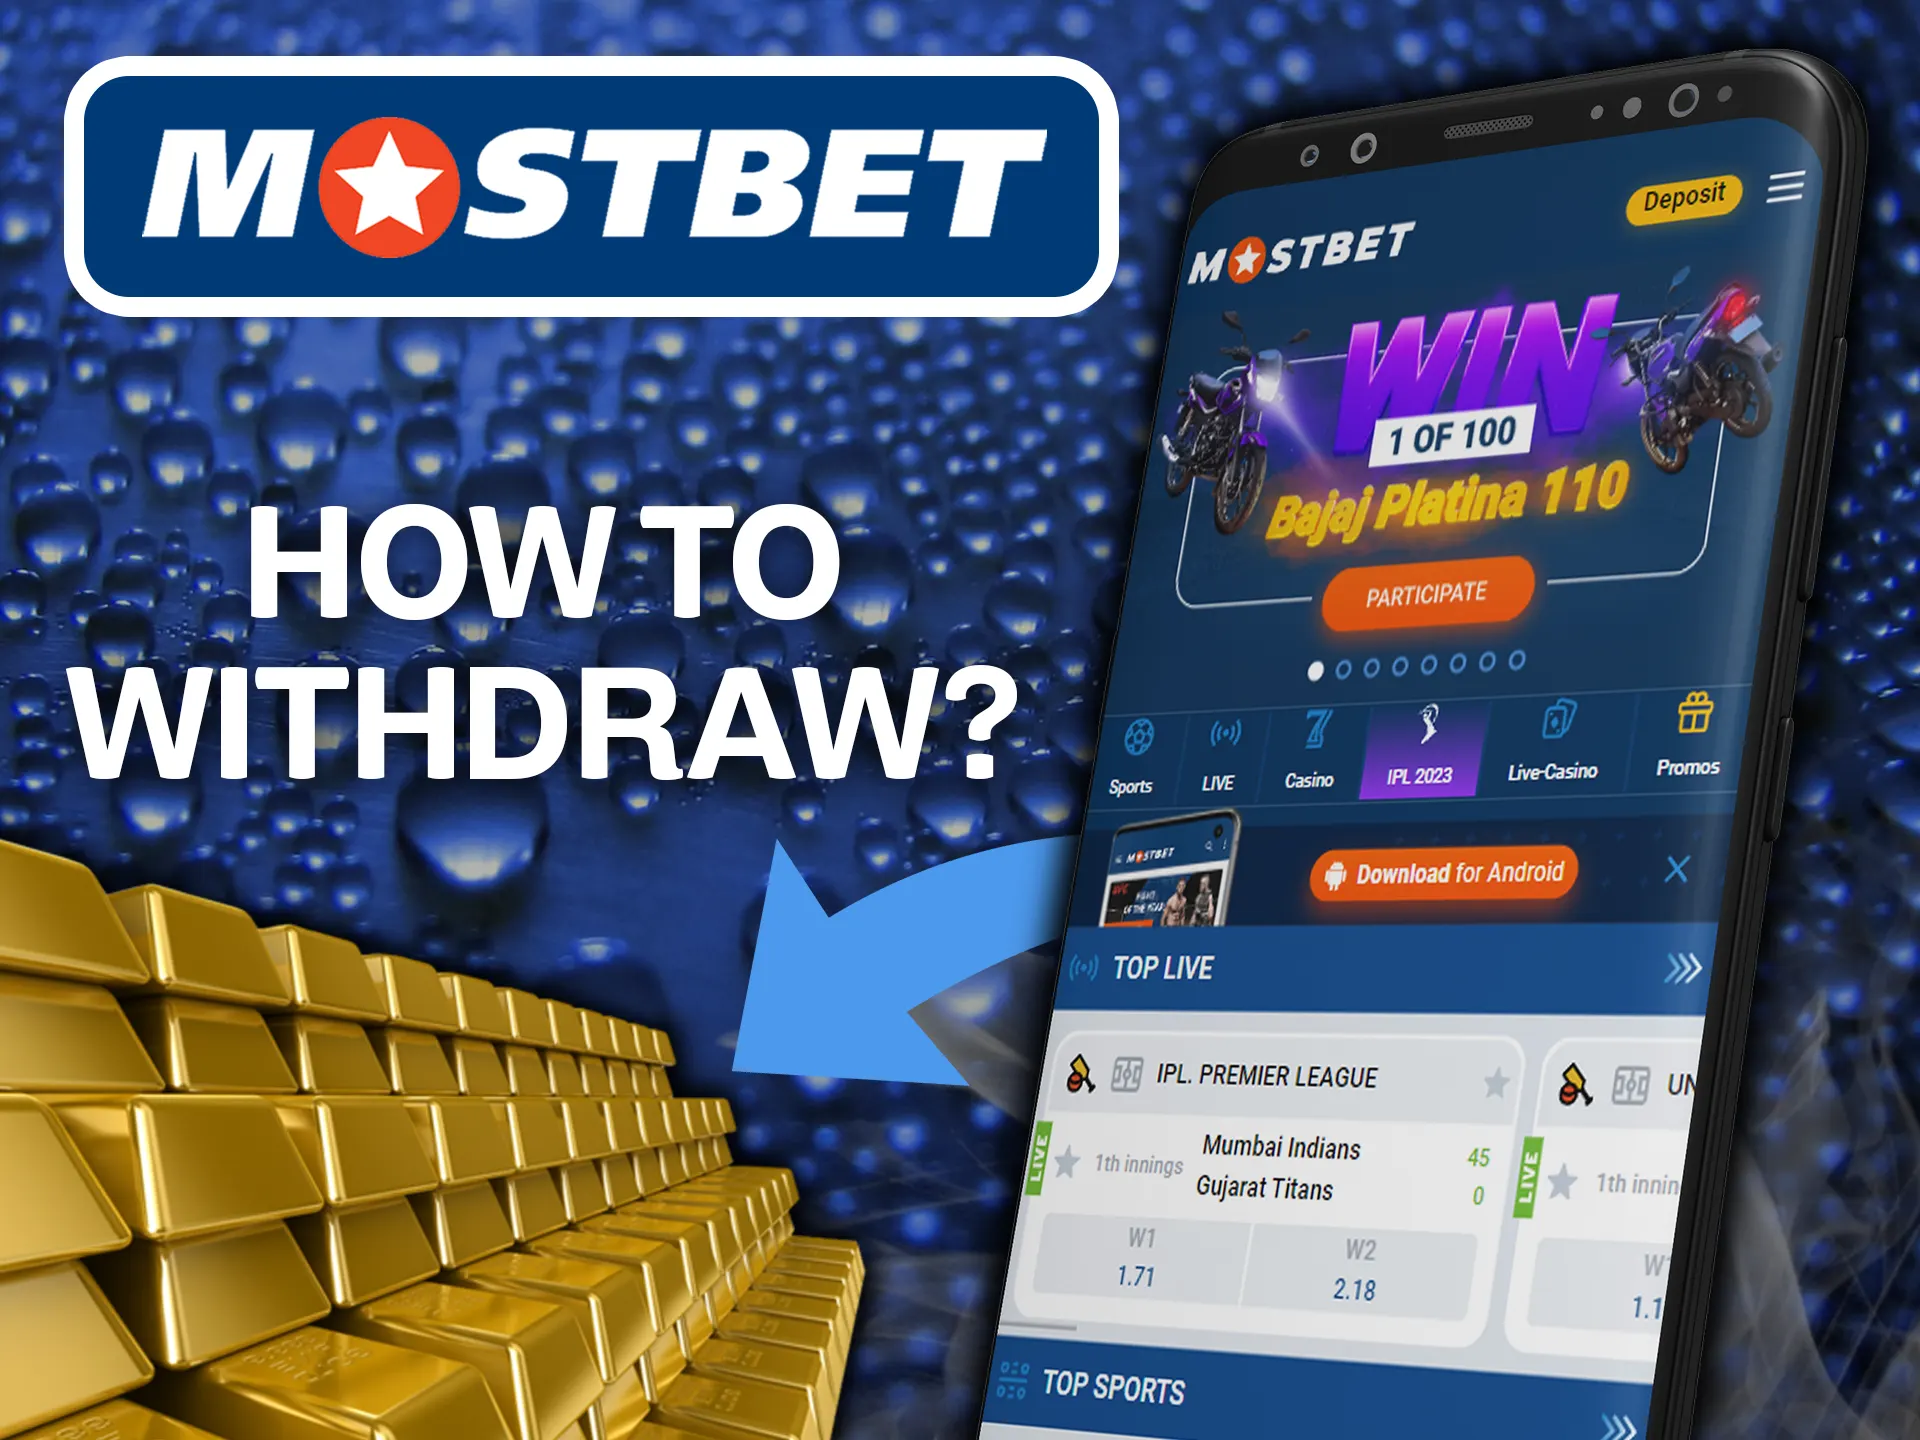 Find the withdrawal tab and withdraw your money without any problems using the Mostbet app.